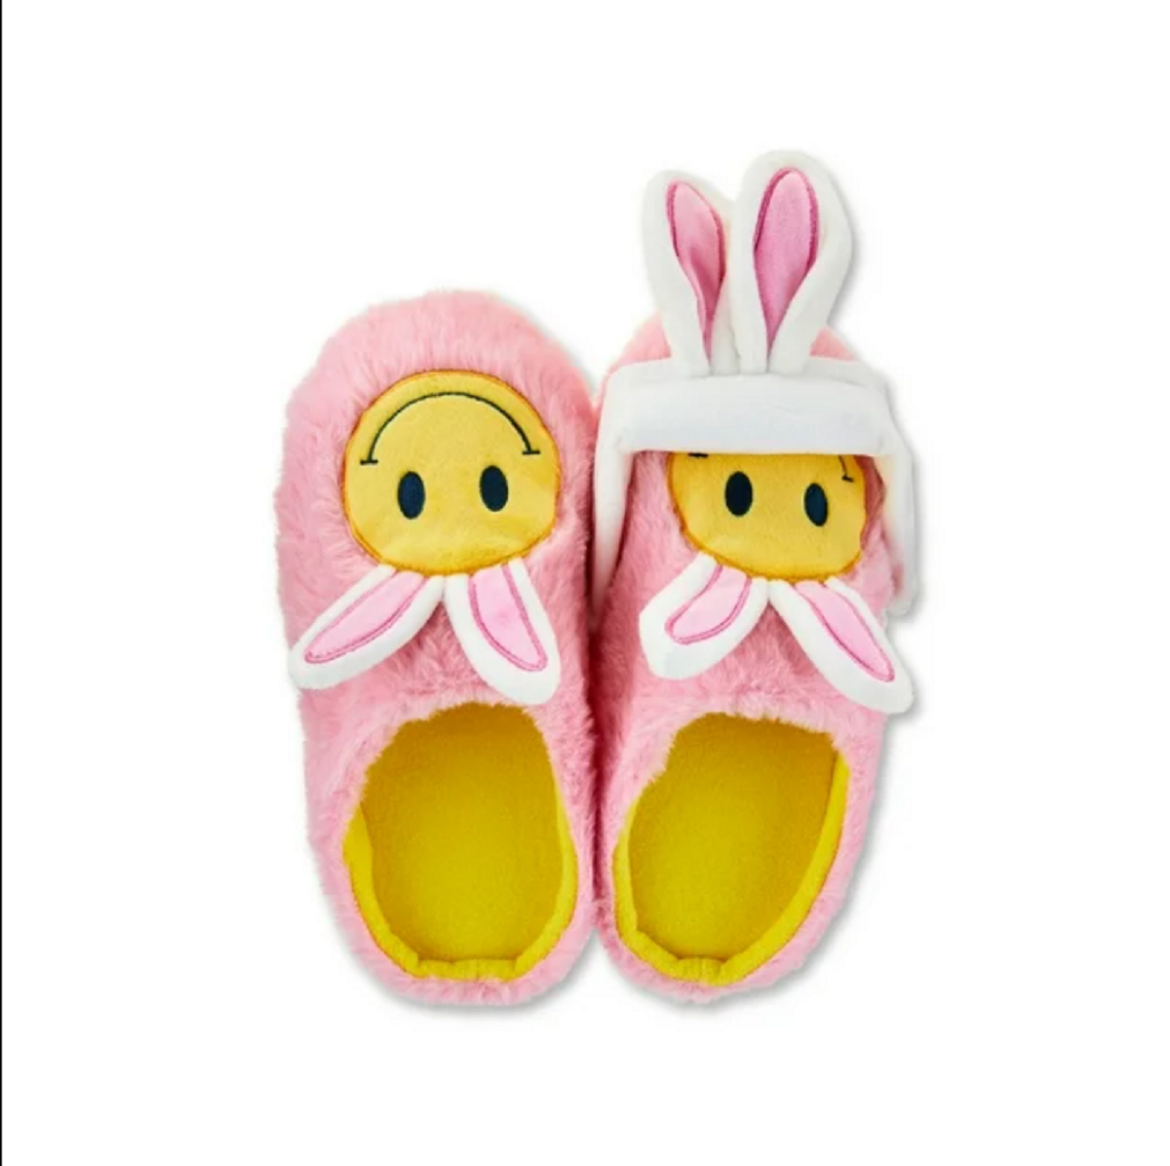 Easter Slipper and Headband Set, Smiley, by Way To Celebrate, 31 March